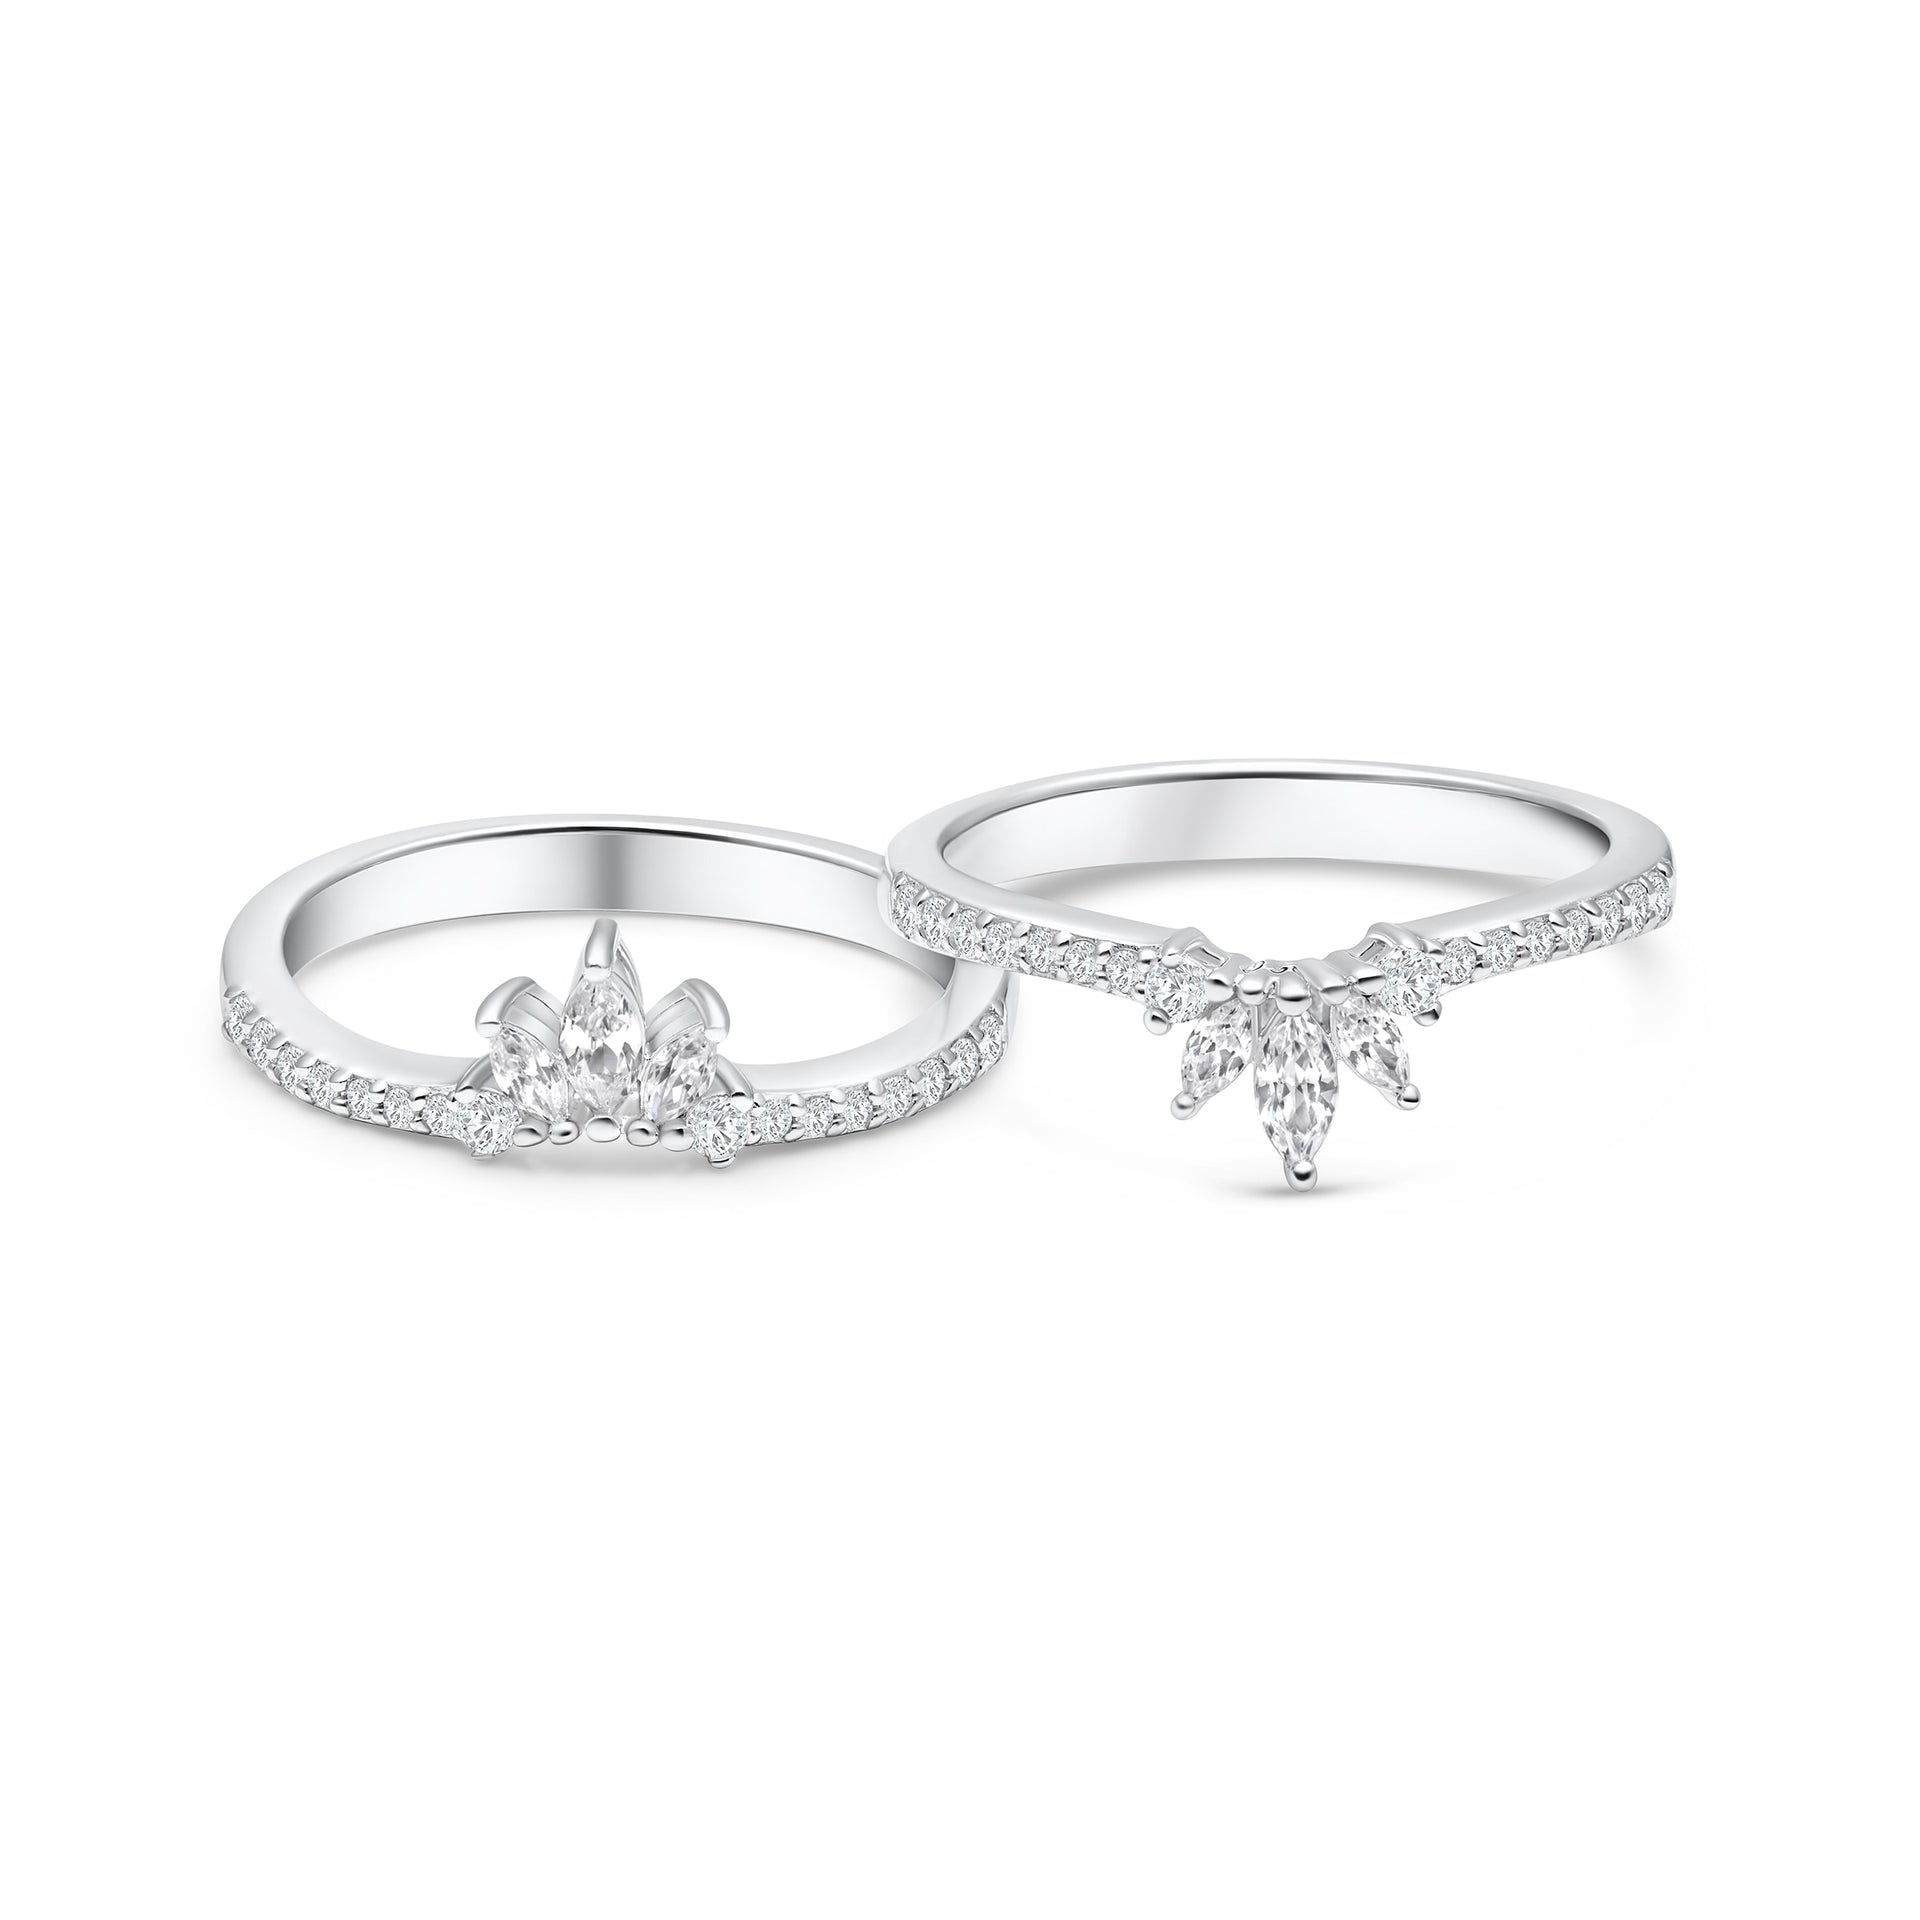  The exquisite v-shaped bands features 3 center marquise stones with round stones glistening down the sides shown in a pair